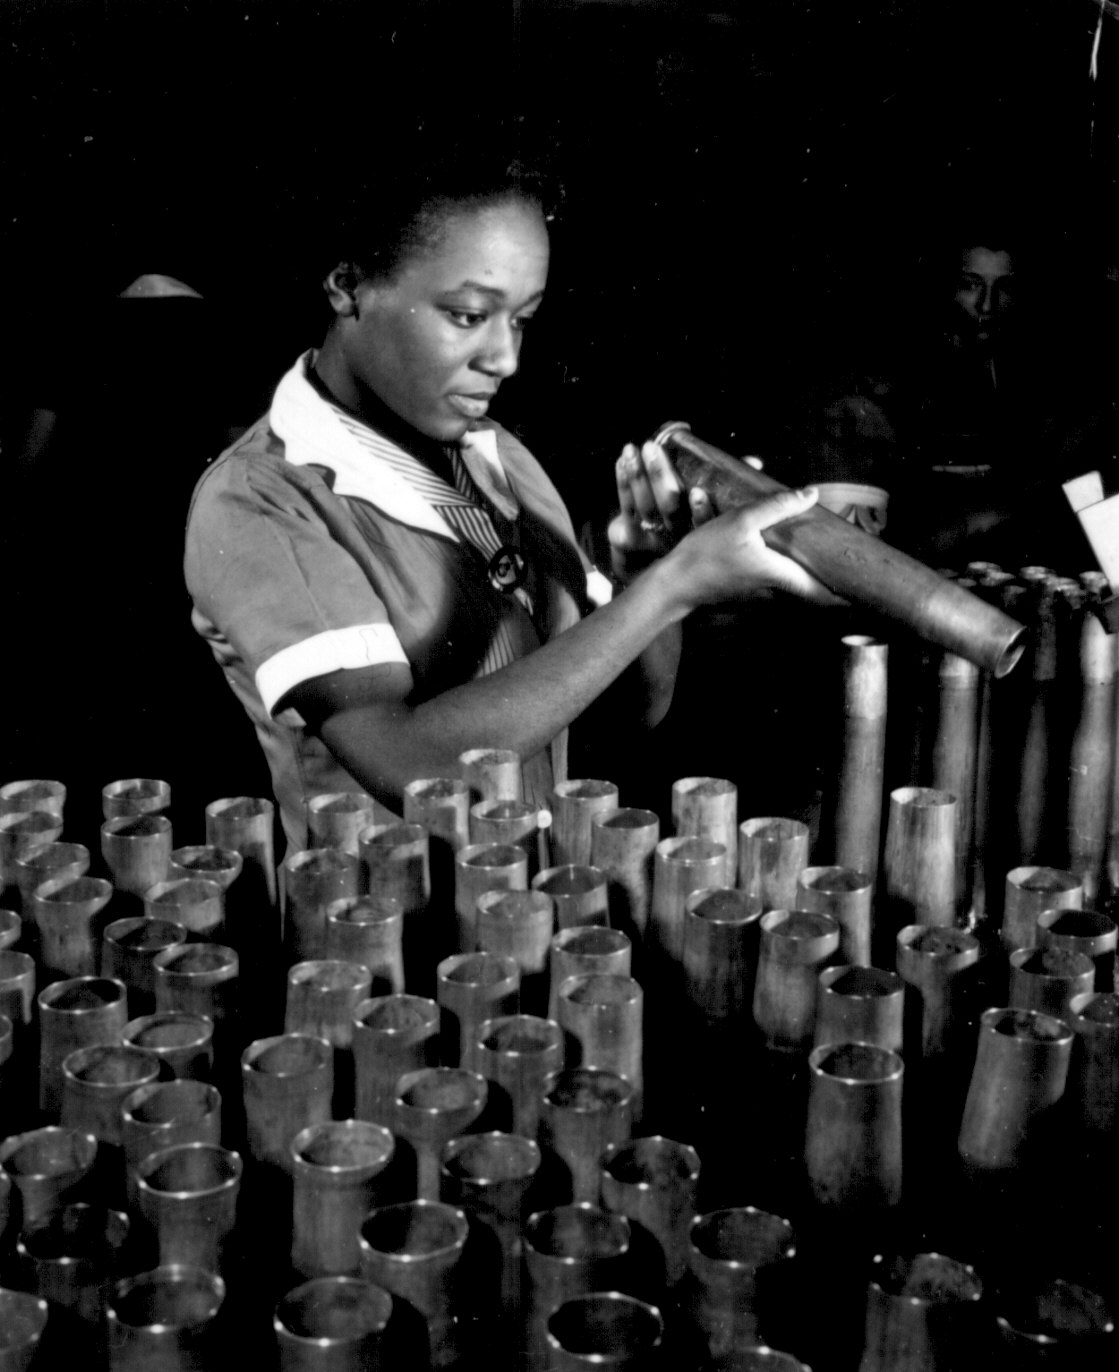 African-American factory worker Bertha Stallworth inspecting a 40-mm artillery shell, Frankford Arsenal, Philadelphia, Pennsylvania, United States, date unknown